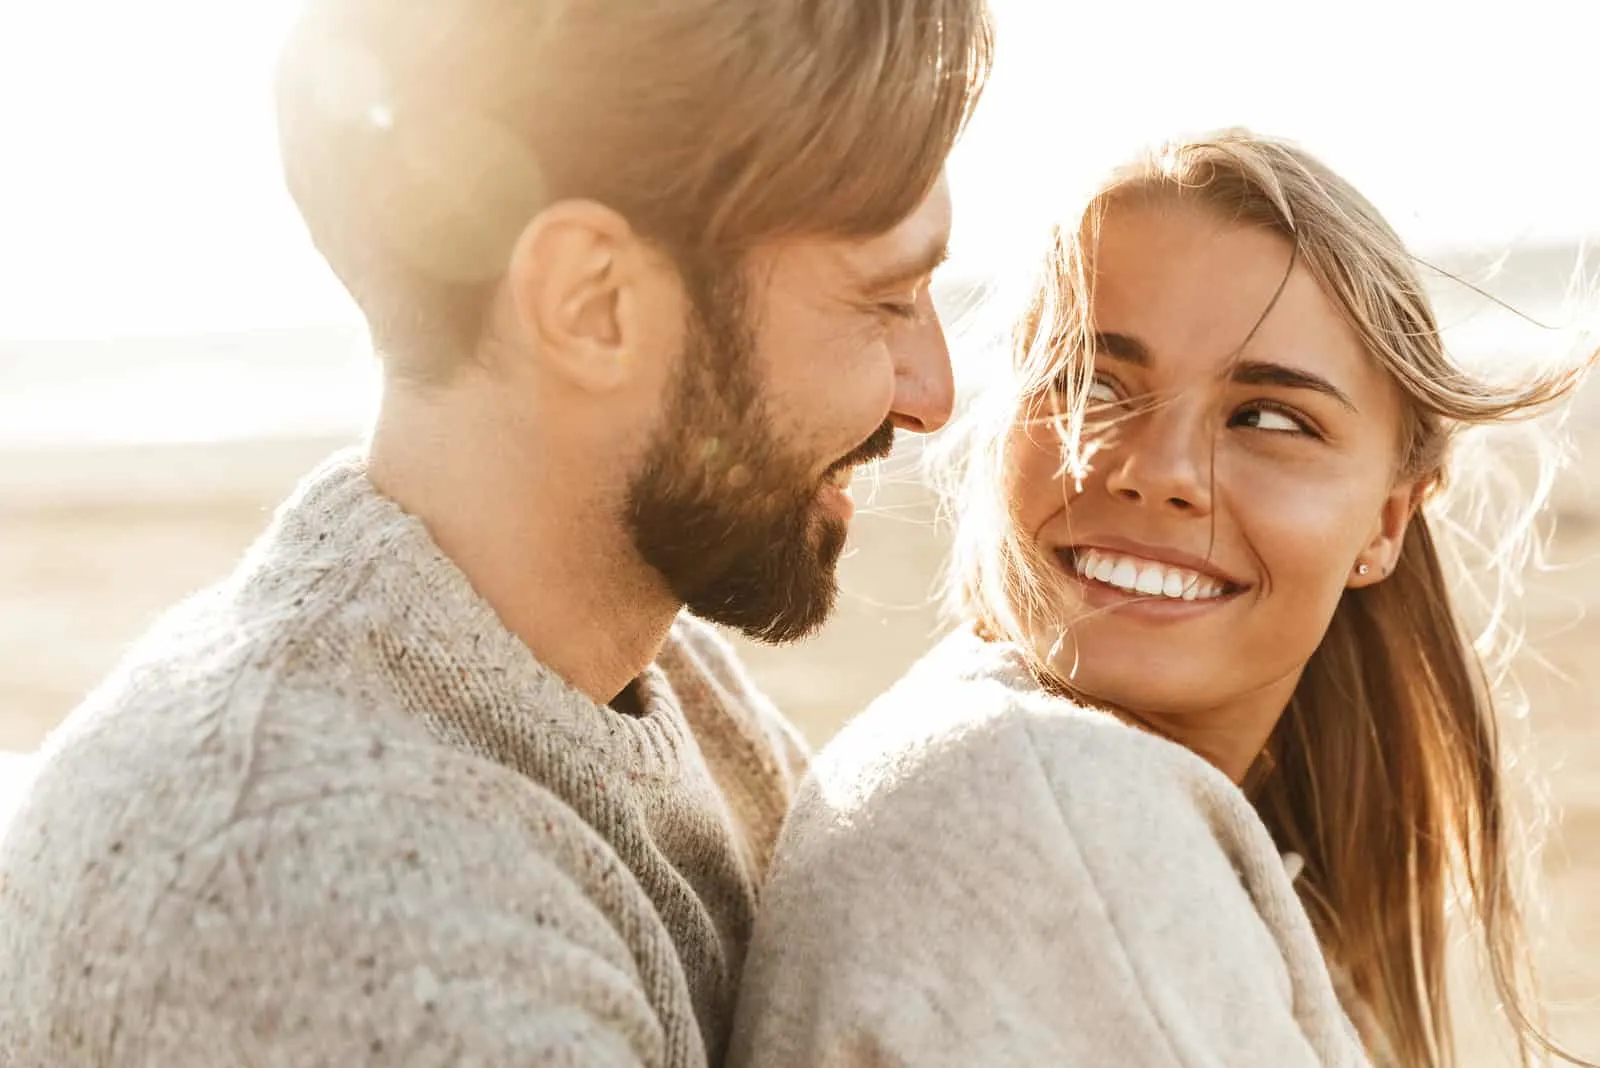 Virgo Man-Gemini Woman Love Match: How Compatible Are They?